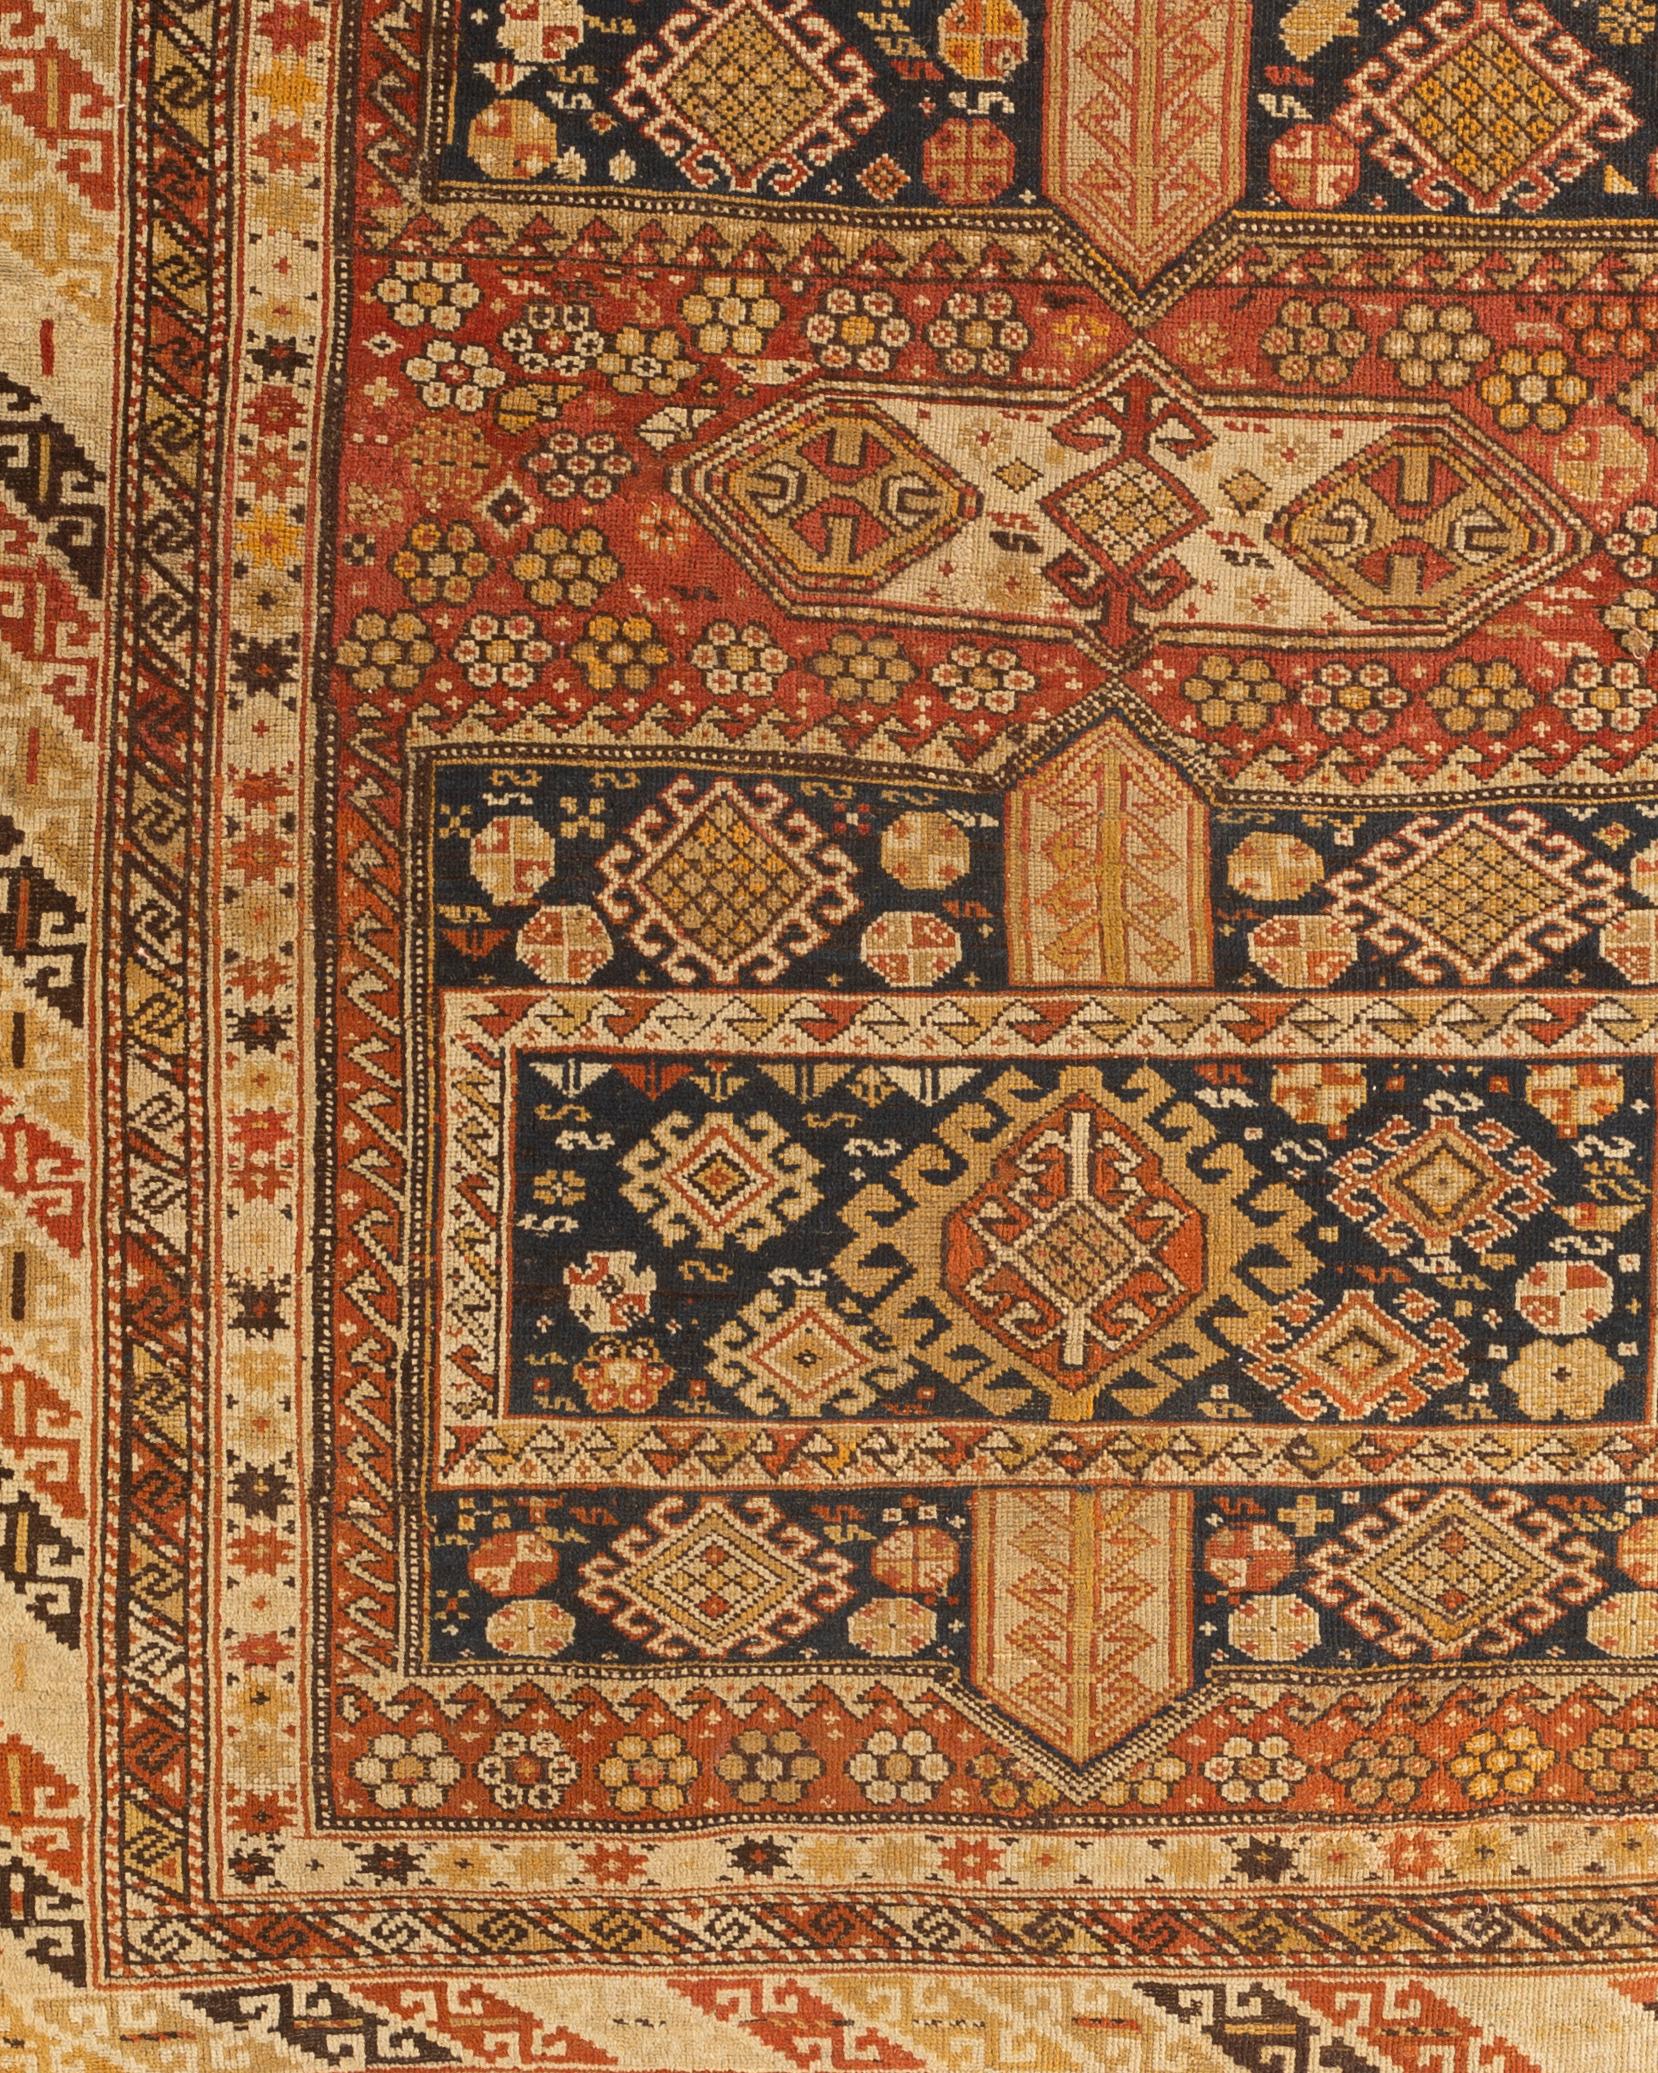 A Shirvan handwoven Caucasian rug, circa 1880. These types of antique Caucasian rugs were woven in the eastern part of the region, mostly along the west coast of the Caspian Sea and show in the design, the ethnic style associated with Caucasian